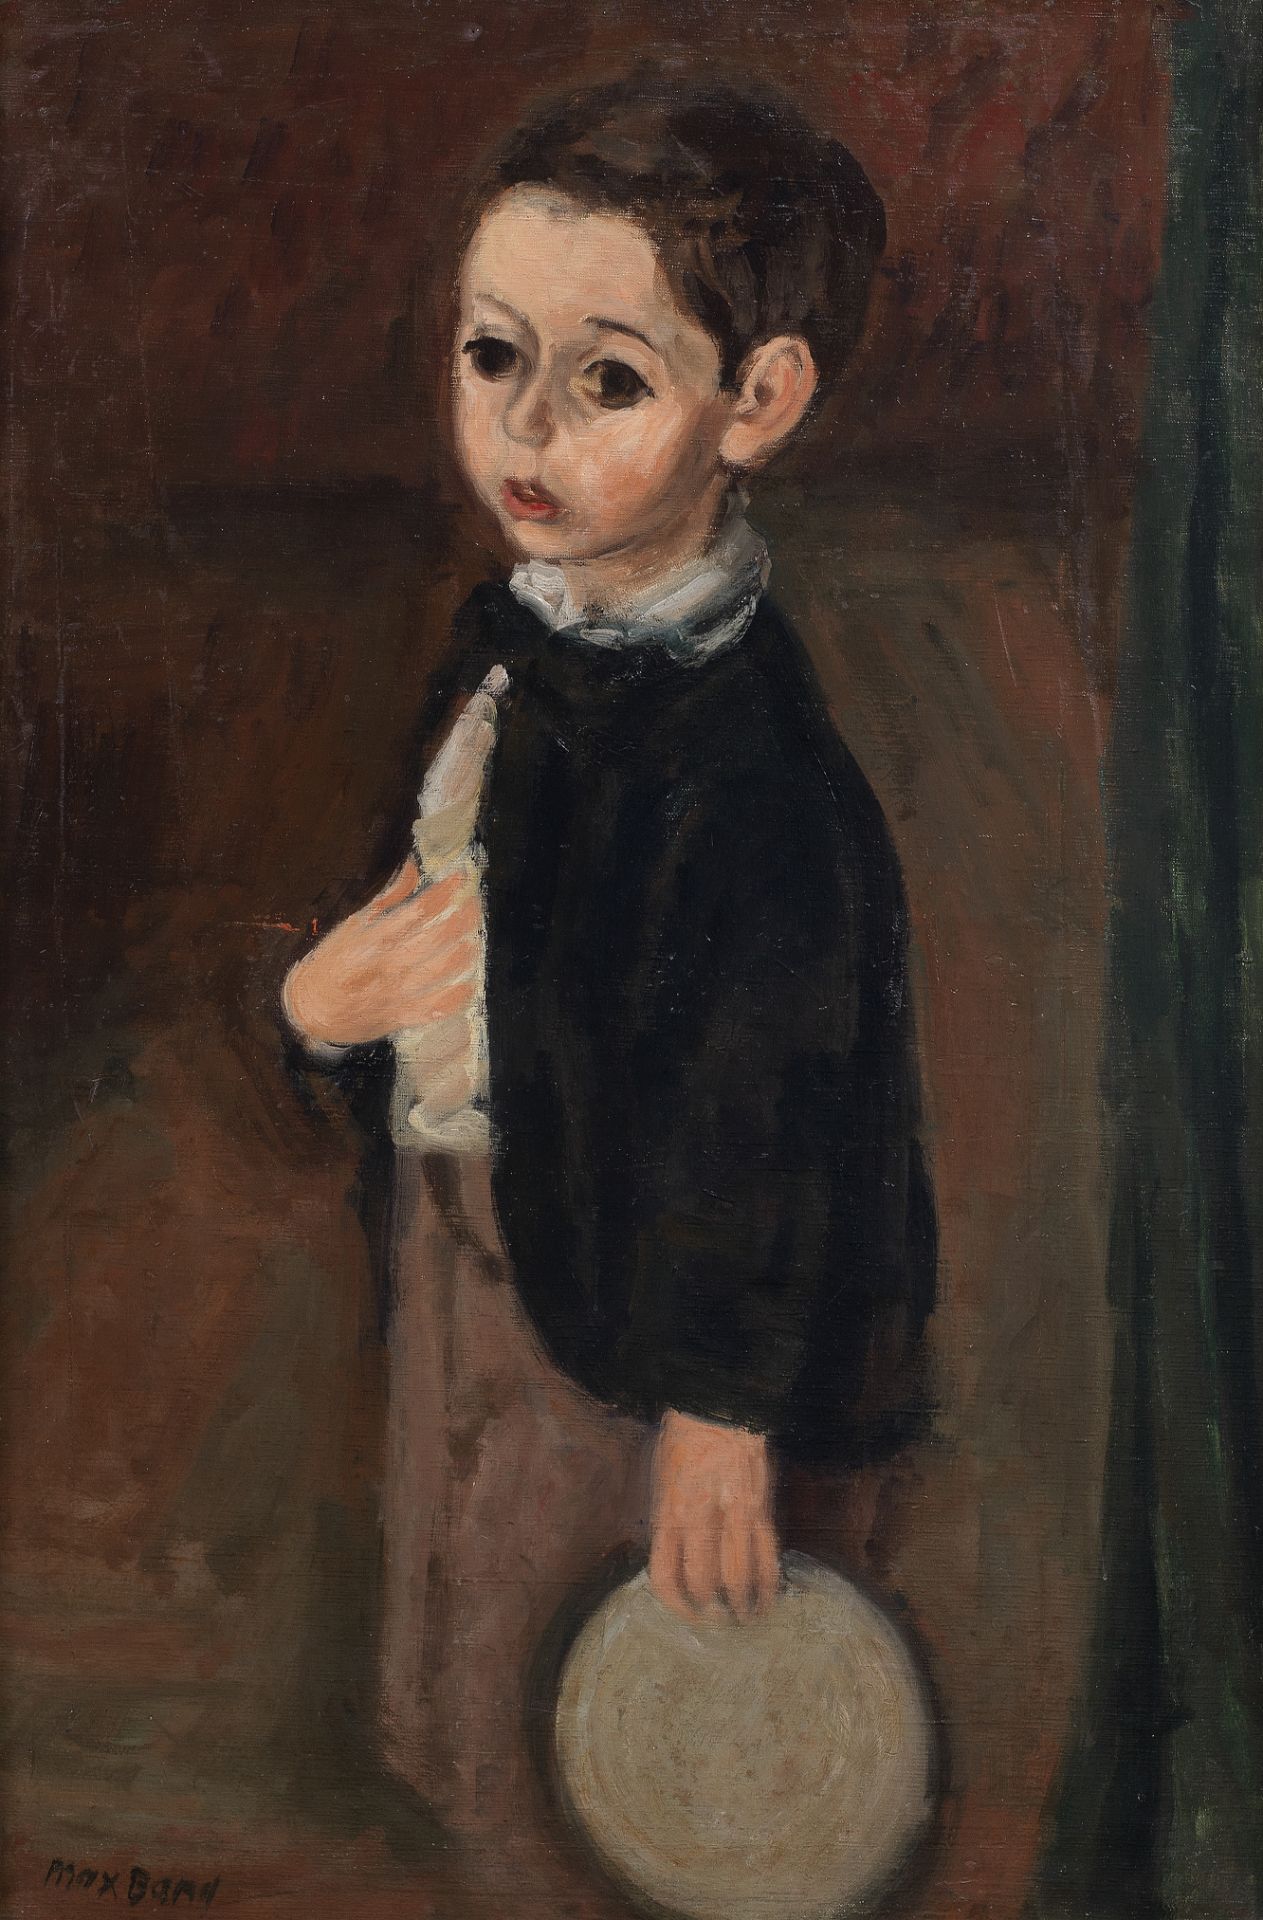 Max Band (Lithuanian, 1900-1974) Young boy